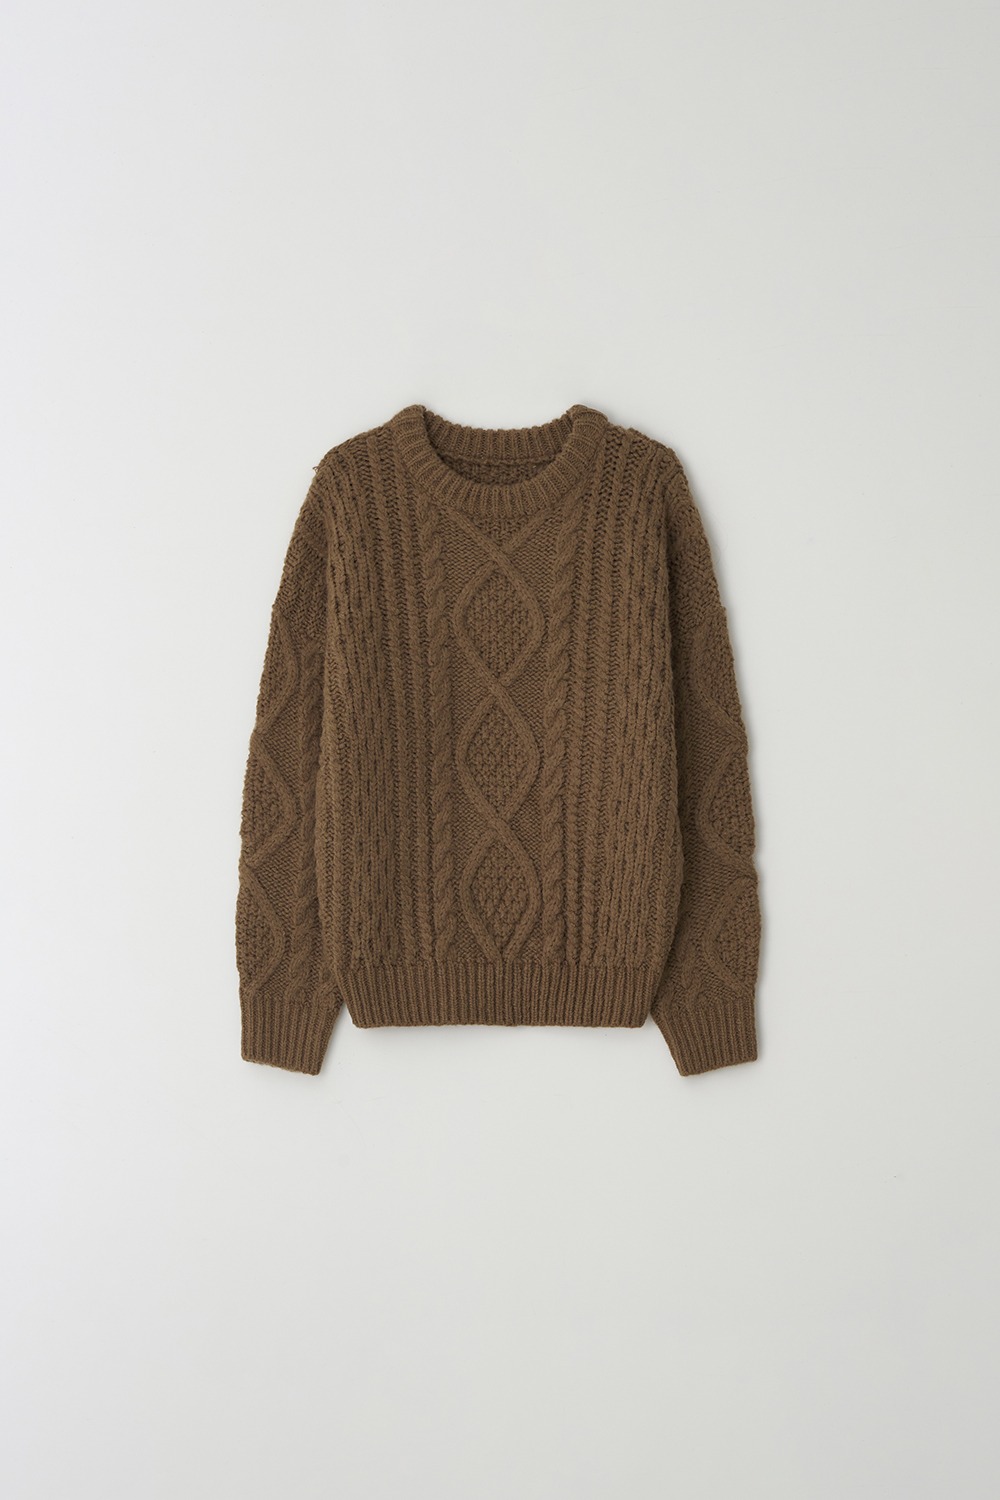 2nd/Bold cable knit (Camel)